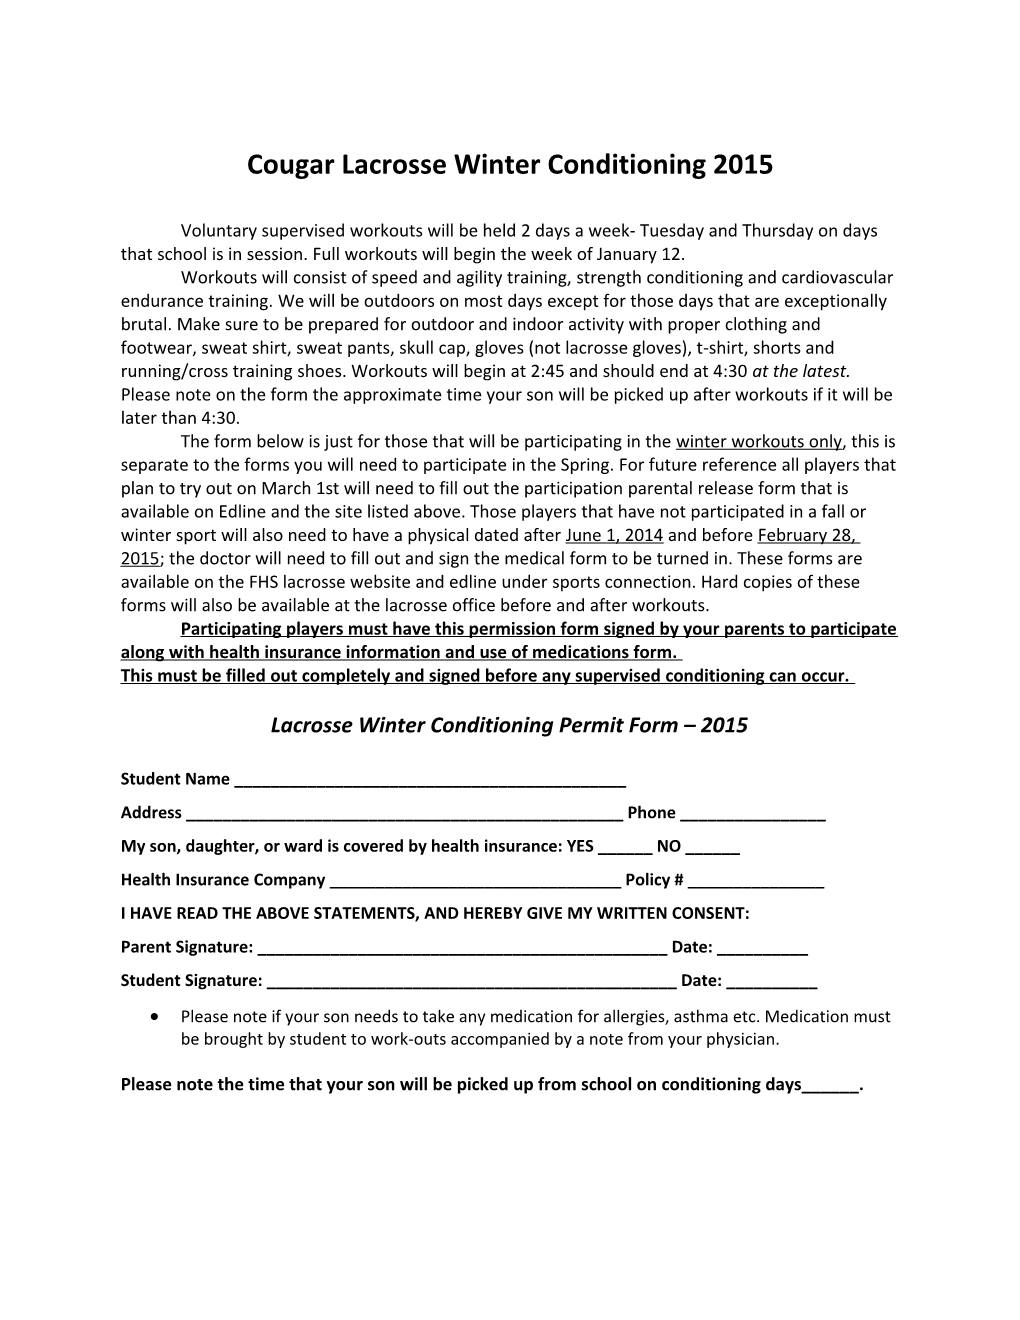 Cougar Lacrosse Winter Conditioning 2015